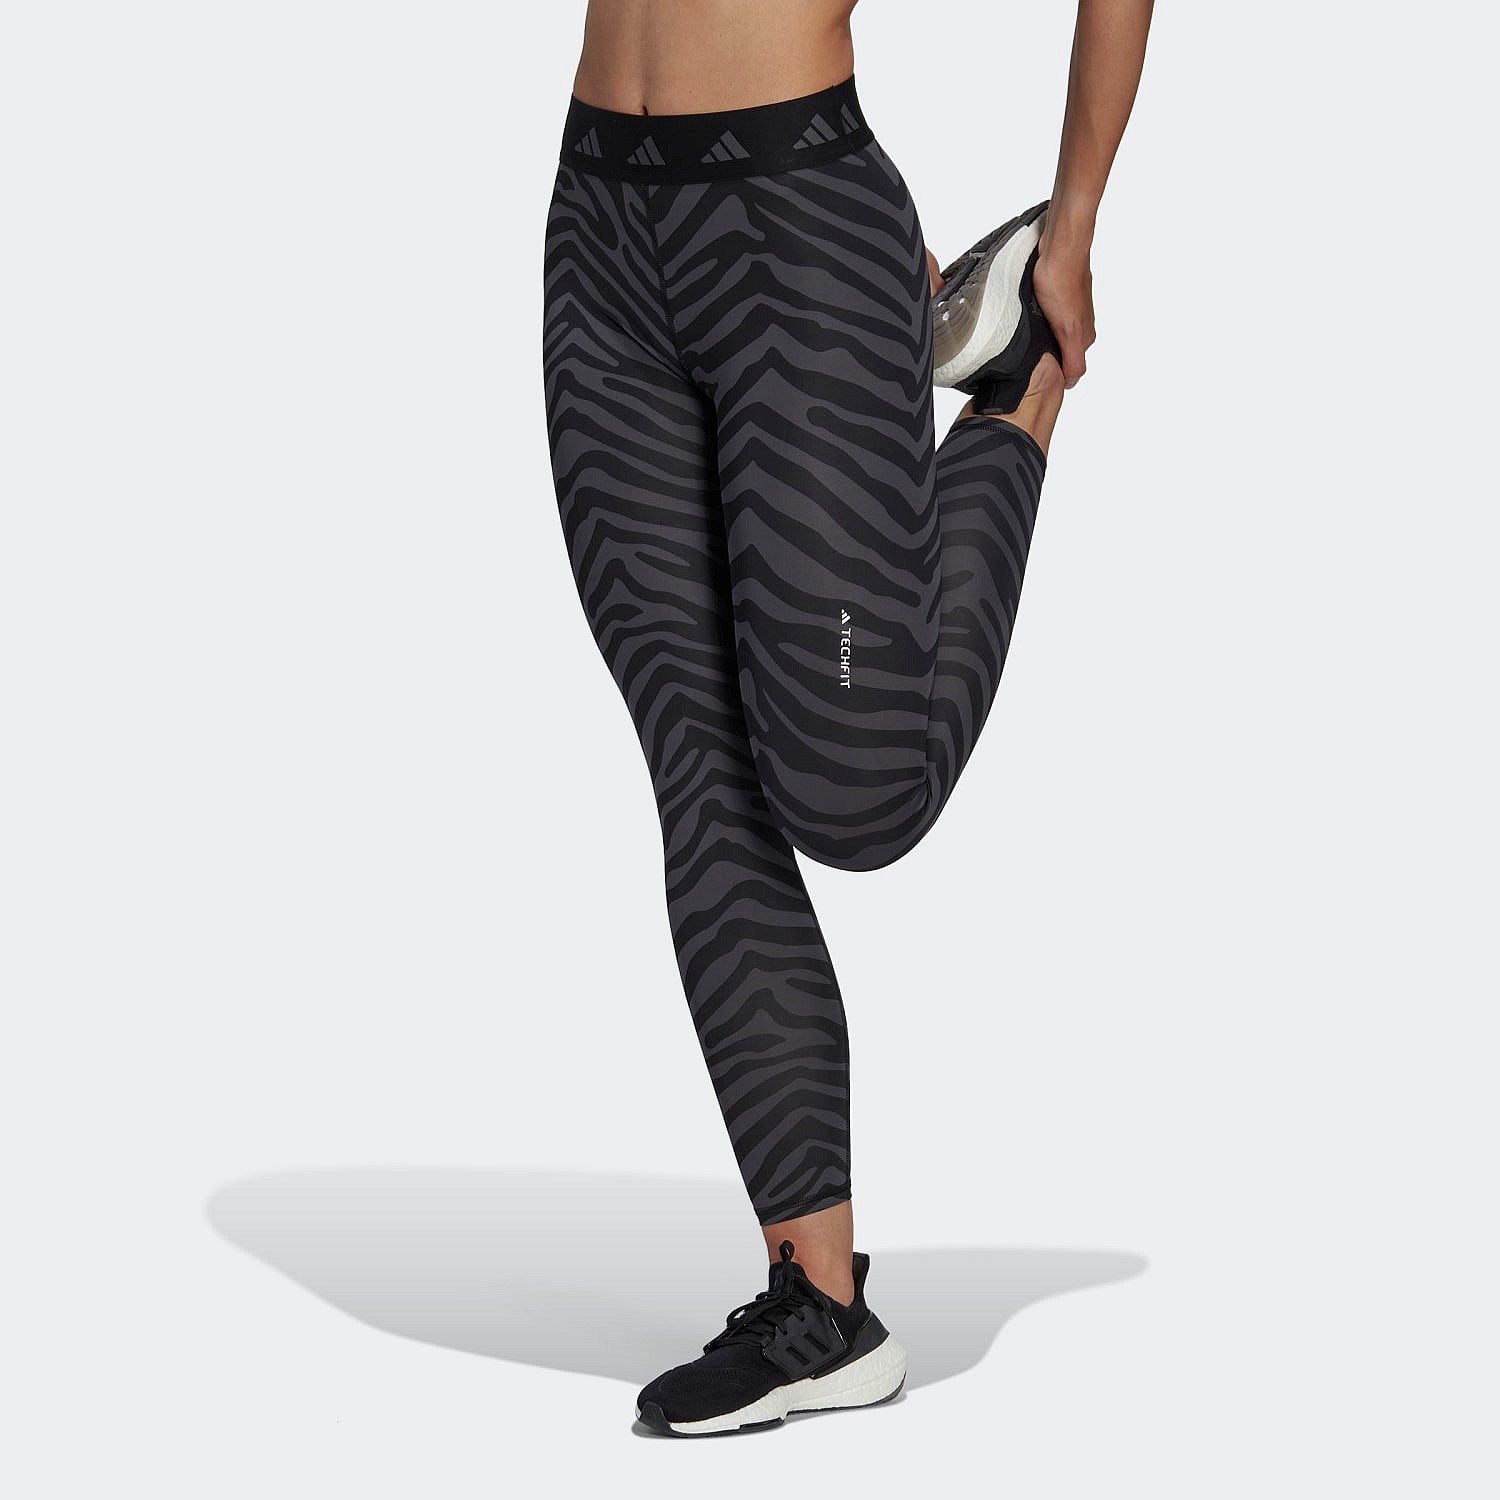 Hyperglam Techfit 7/8 Tights, Tights